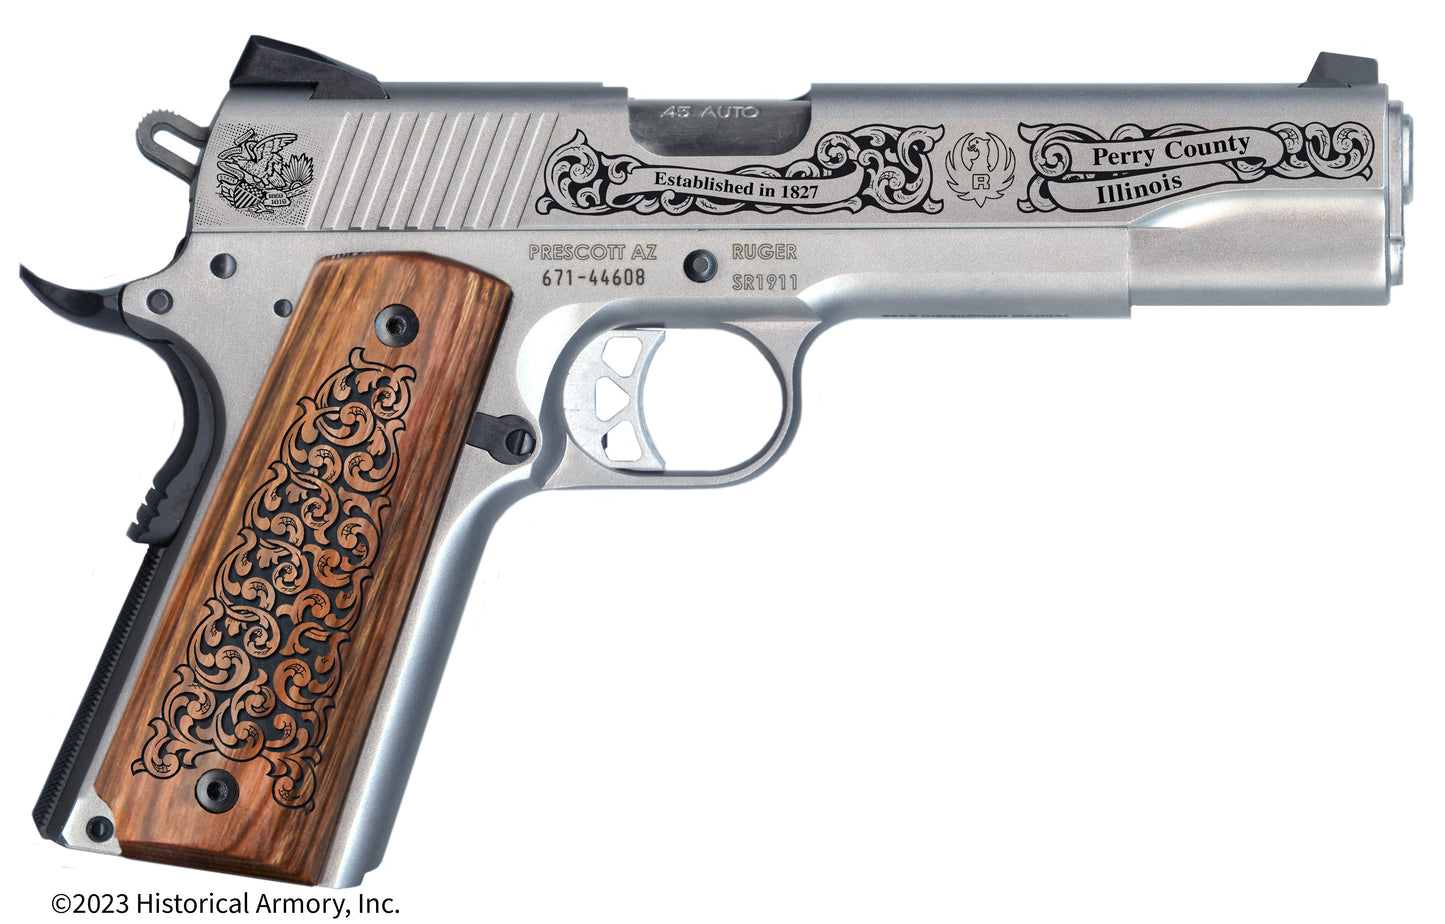 Perry County Illinois Engraved .45 Auto Ruger 1911